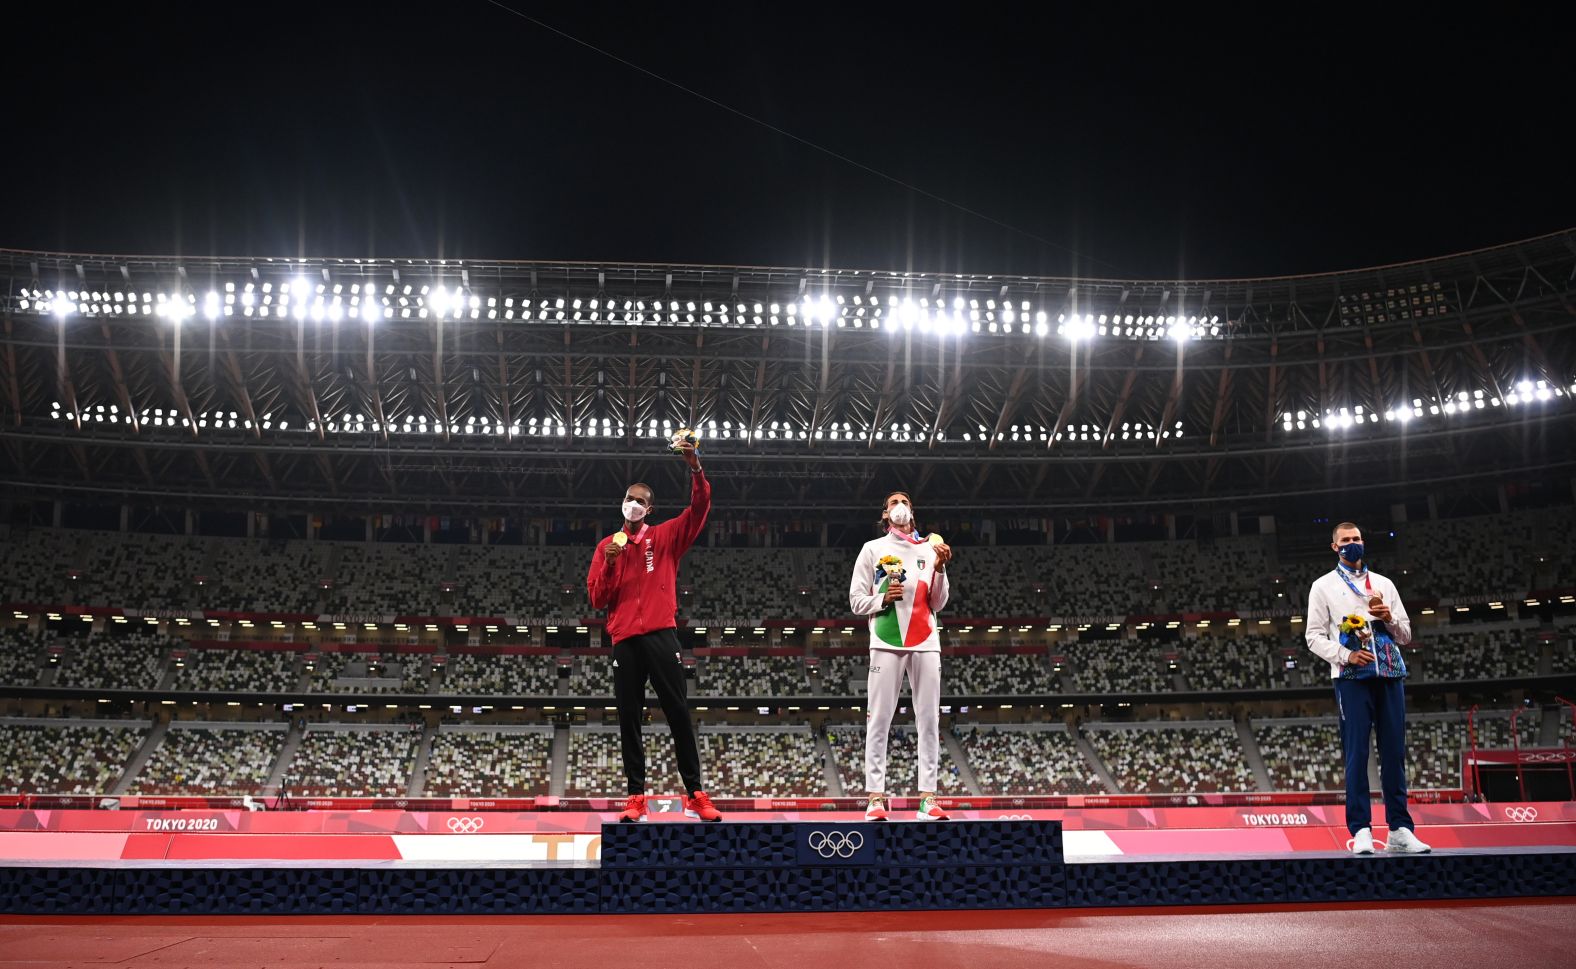 Qatar's Mutaz Essa Barshim, left, and Italy's Gianmarco Tamberi share the podium during a medal ceremony on August 2. <a href="index.php?page=&url=https%3A%2F%2Fwww.cnn.com%2Fworld%2Flive-news%2Ftokyo-2020-olympics-08-01-21-spt%2Fh_86532abc405785d7c29b0fda0e27cdce" target="_blank">They agreed to share the gold medal in high jump</a> after they both cleared 2.37 meters but failed to clear 2.39. Beside them is bronze medalist Maksim Nedasekau of Belarus. No one was given a silver medal.